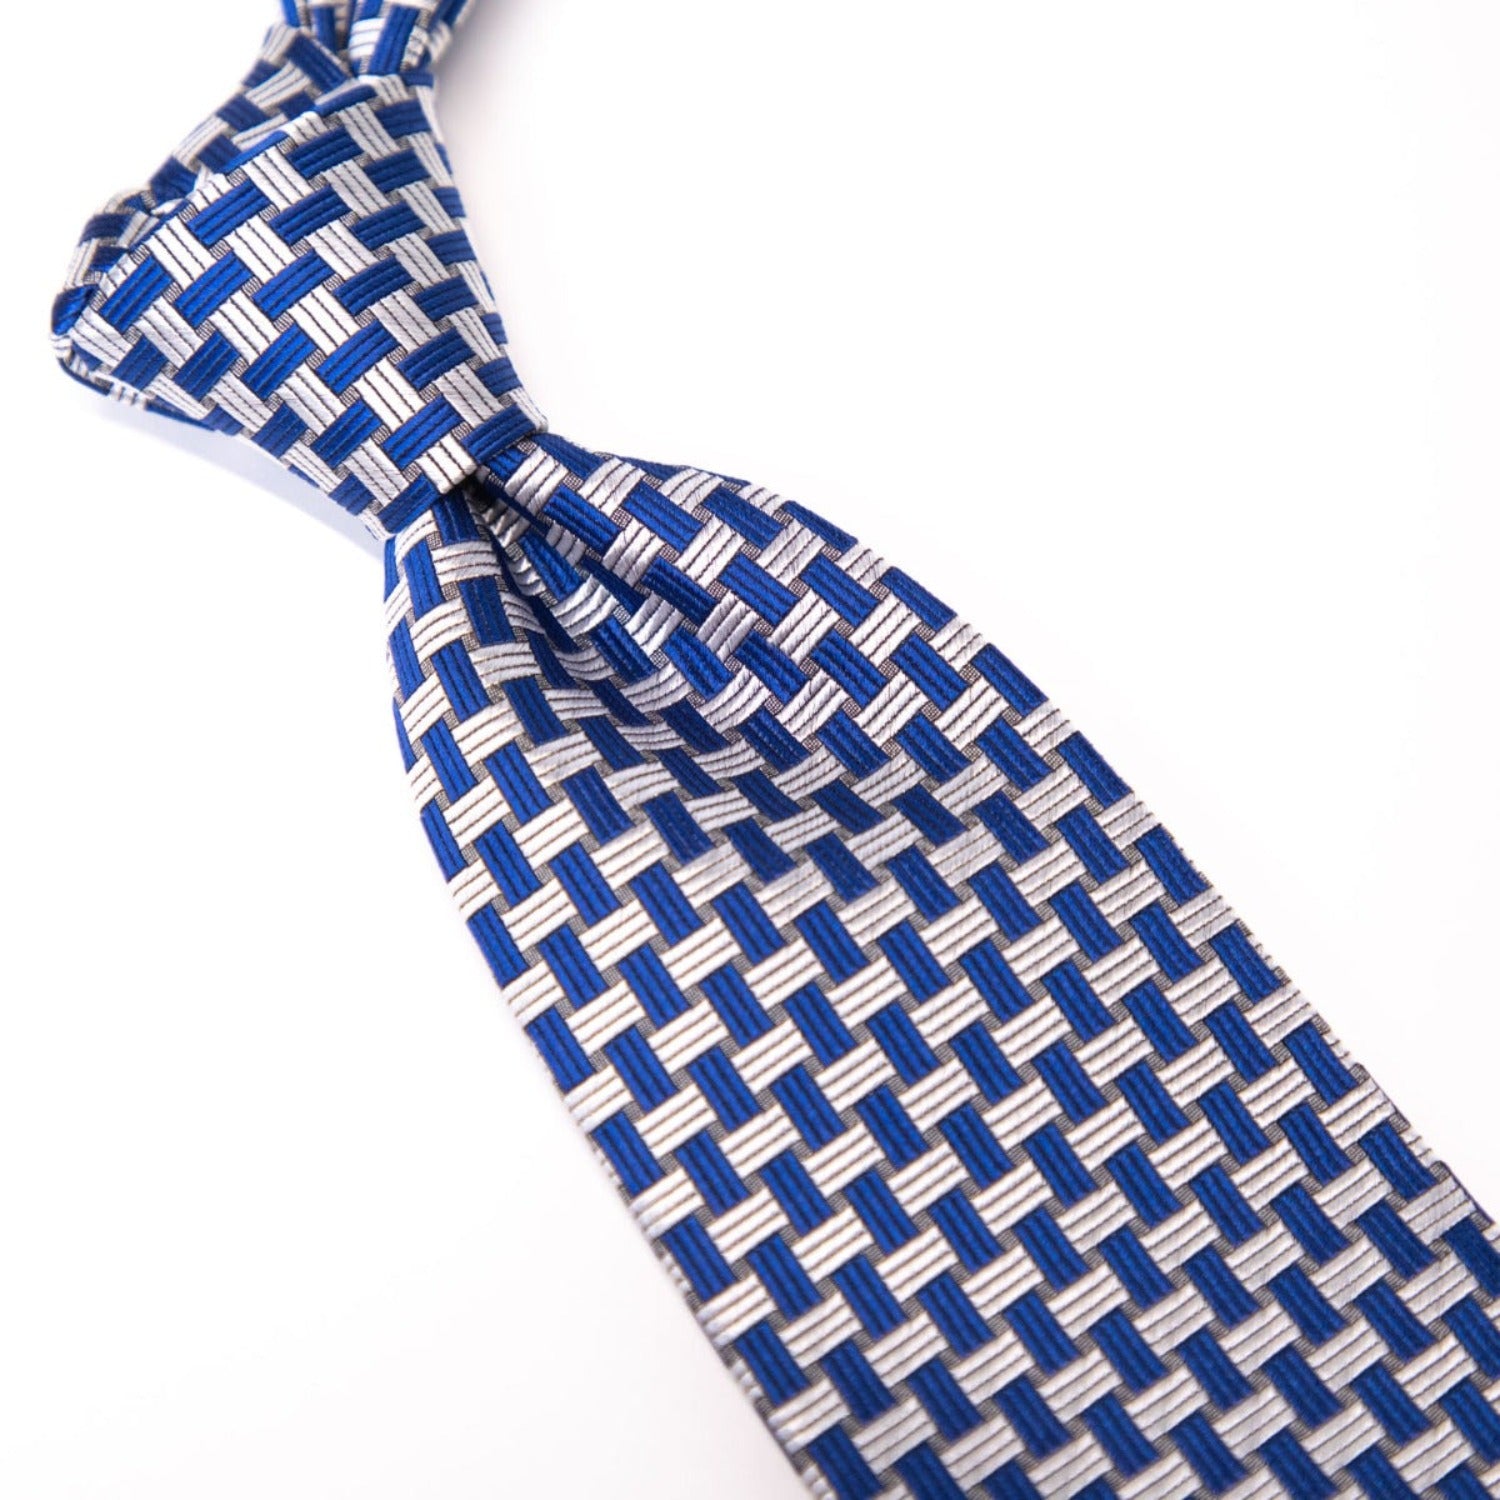 A Sovereign Grade Blue Basket Weave Silk Tie by KirbyAllison.com on a white surface.